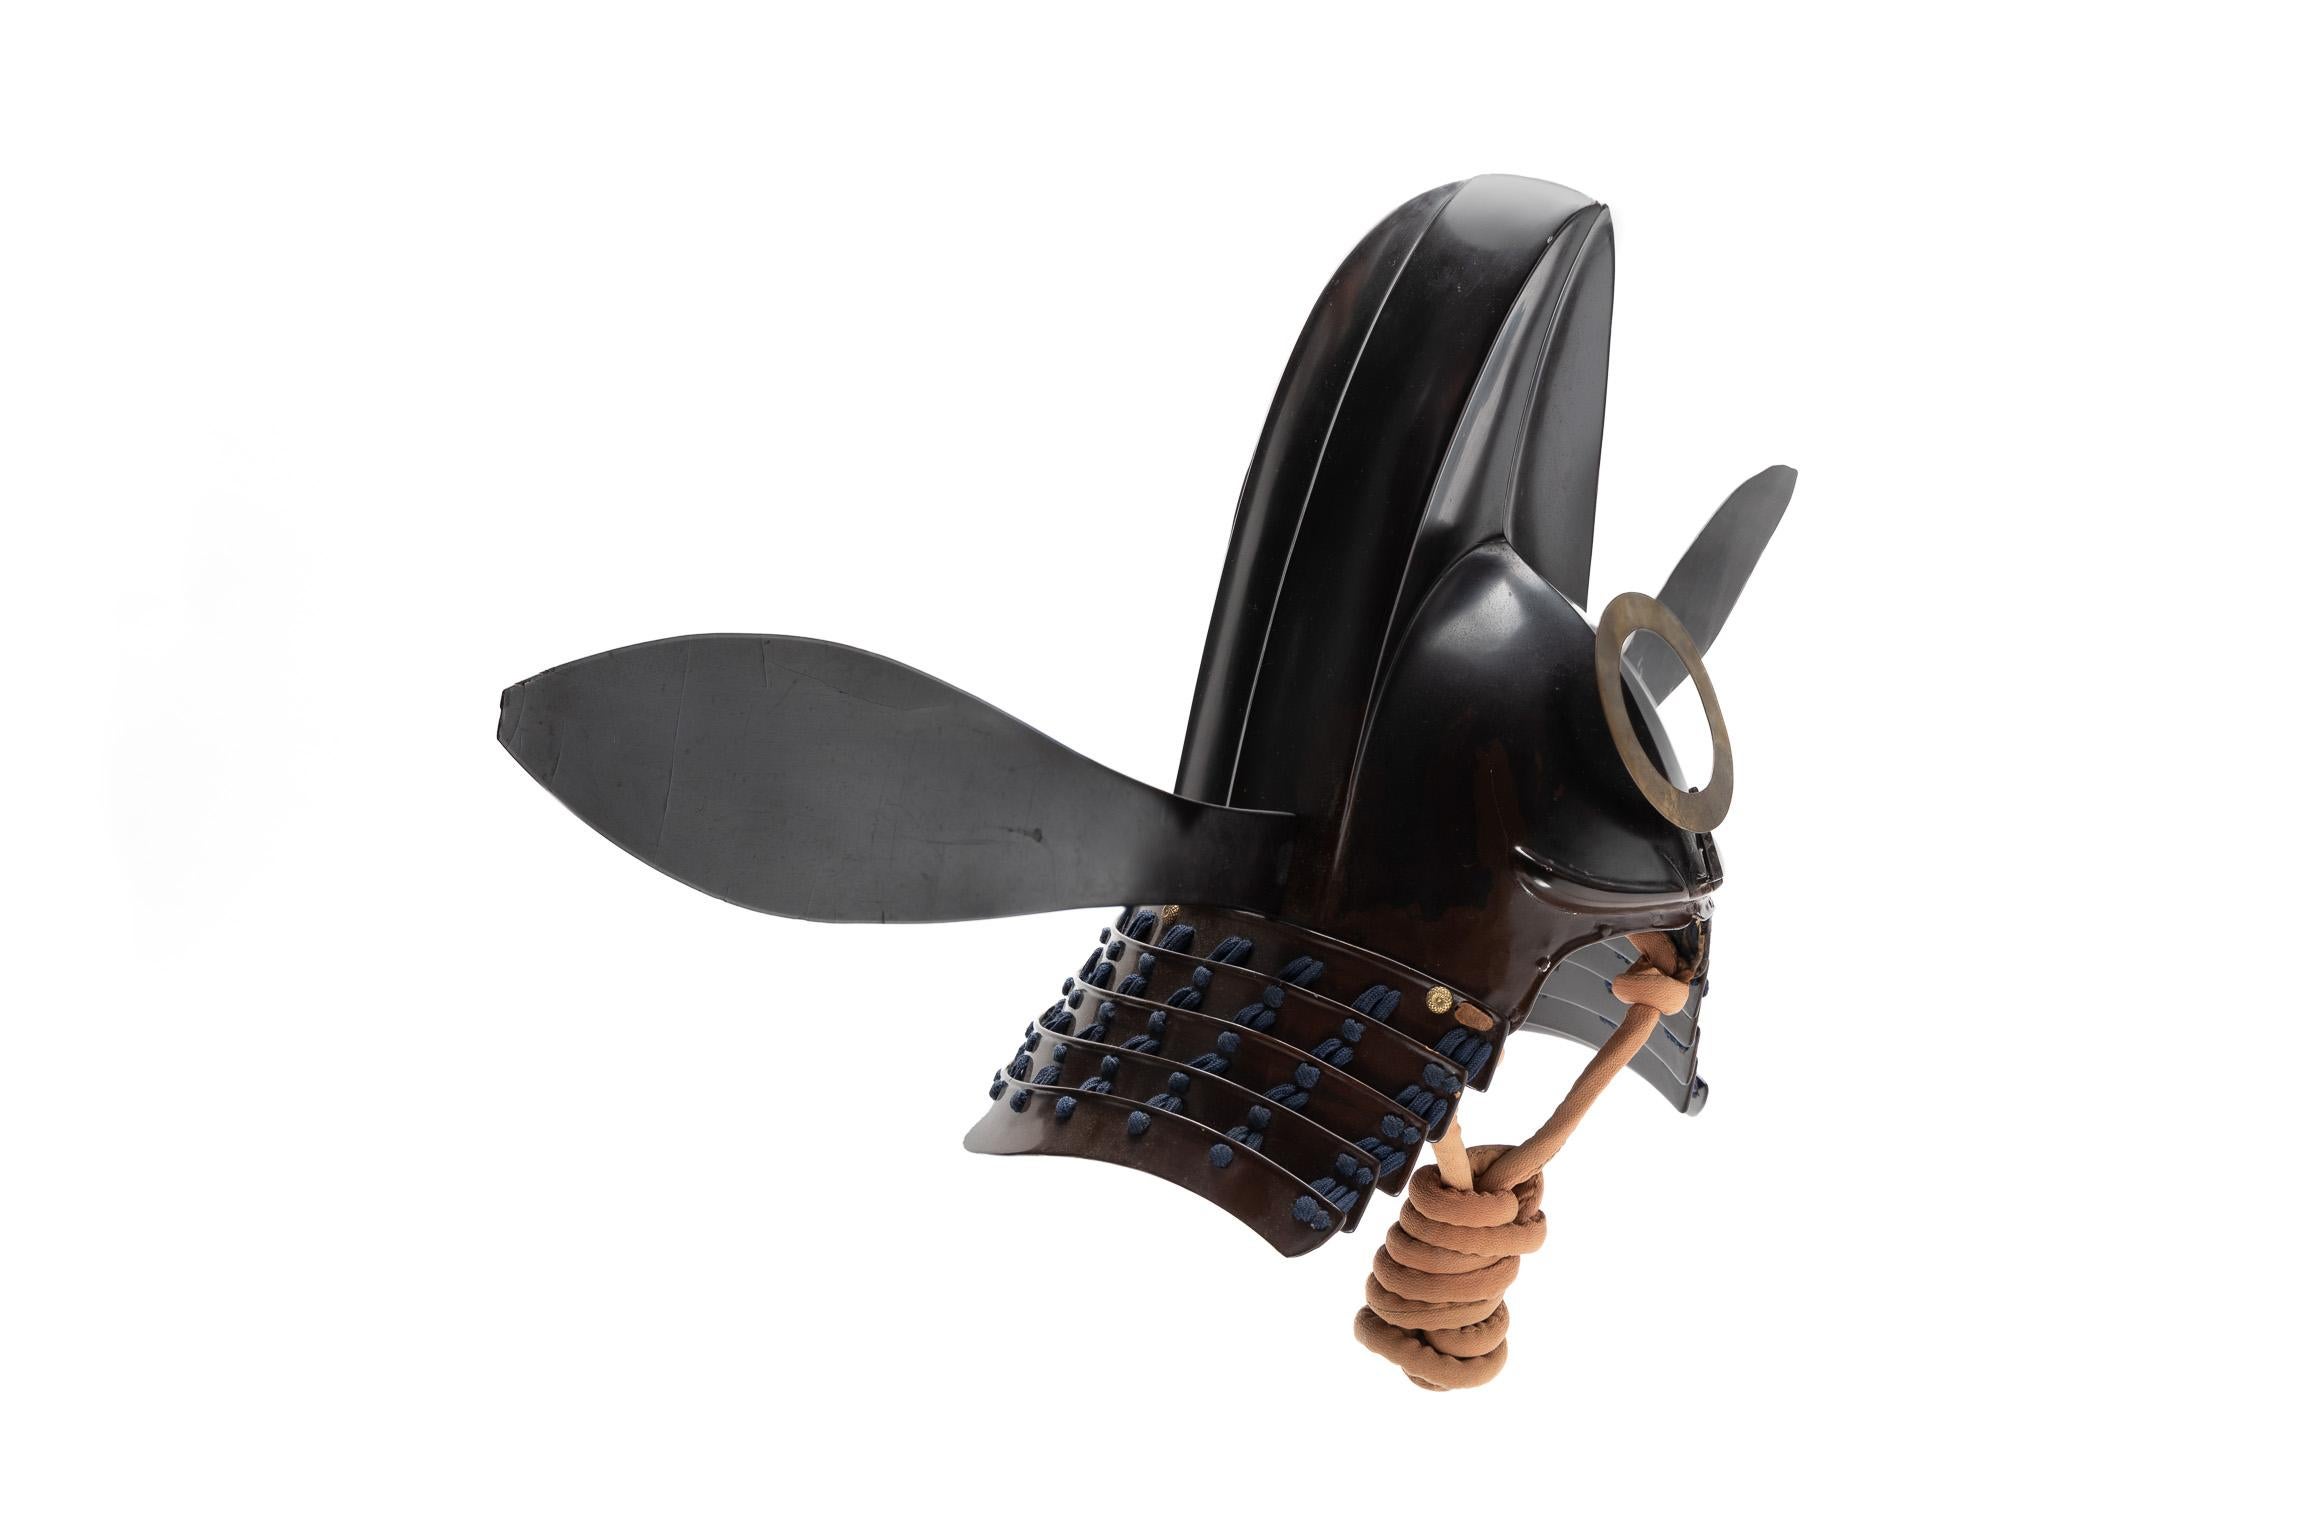 Tokanmuri kabuto
Samurai helmet in the shape of a court cap

Momoyama to early Edo Period

17th century

 

The wearing of helmets that reproduced the shapes of traditional headgear became common among members of the military class by the